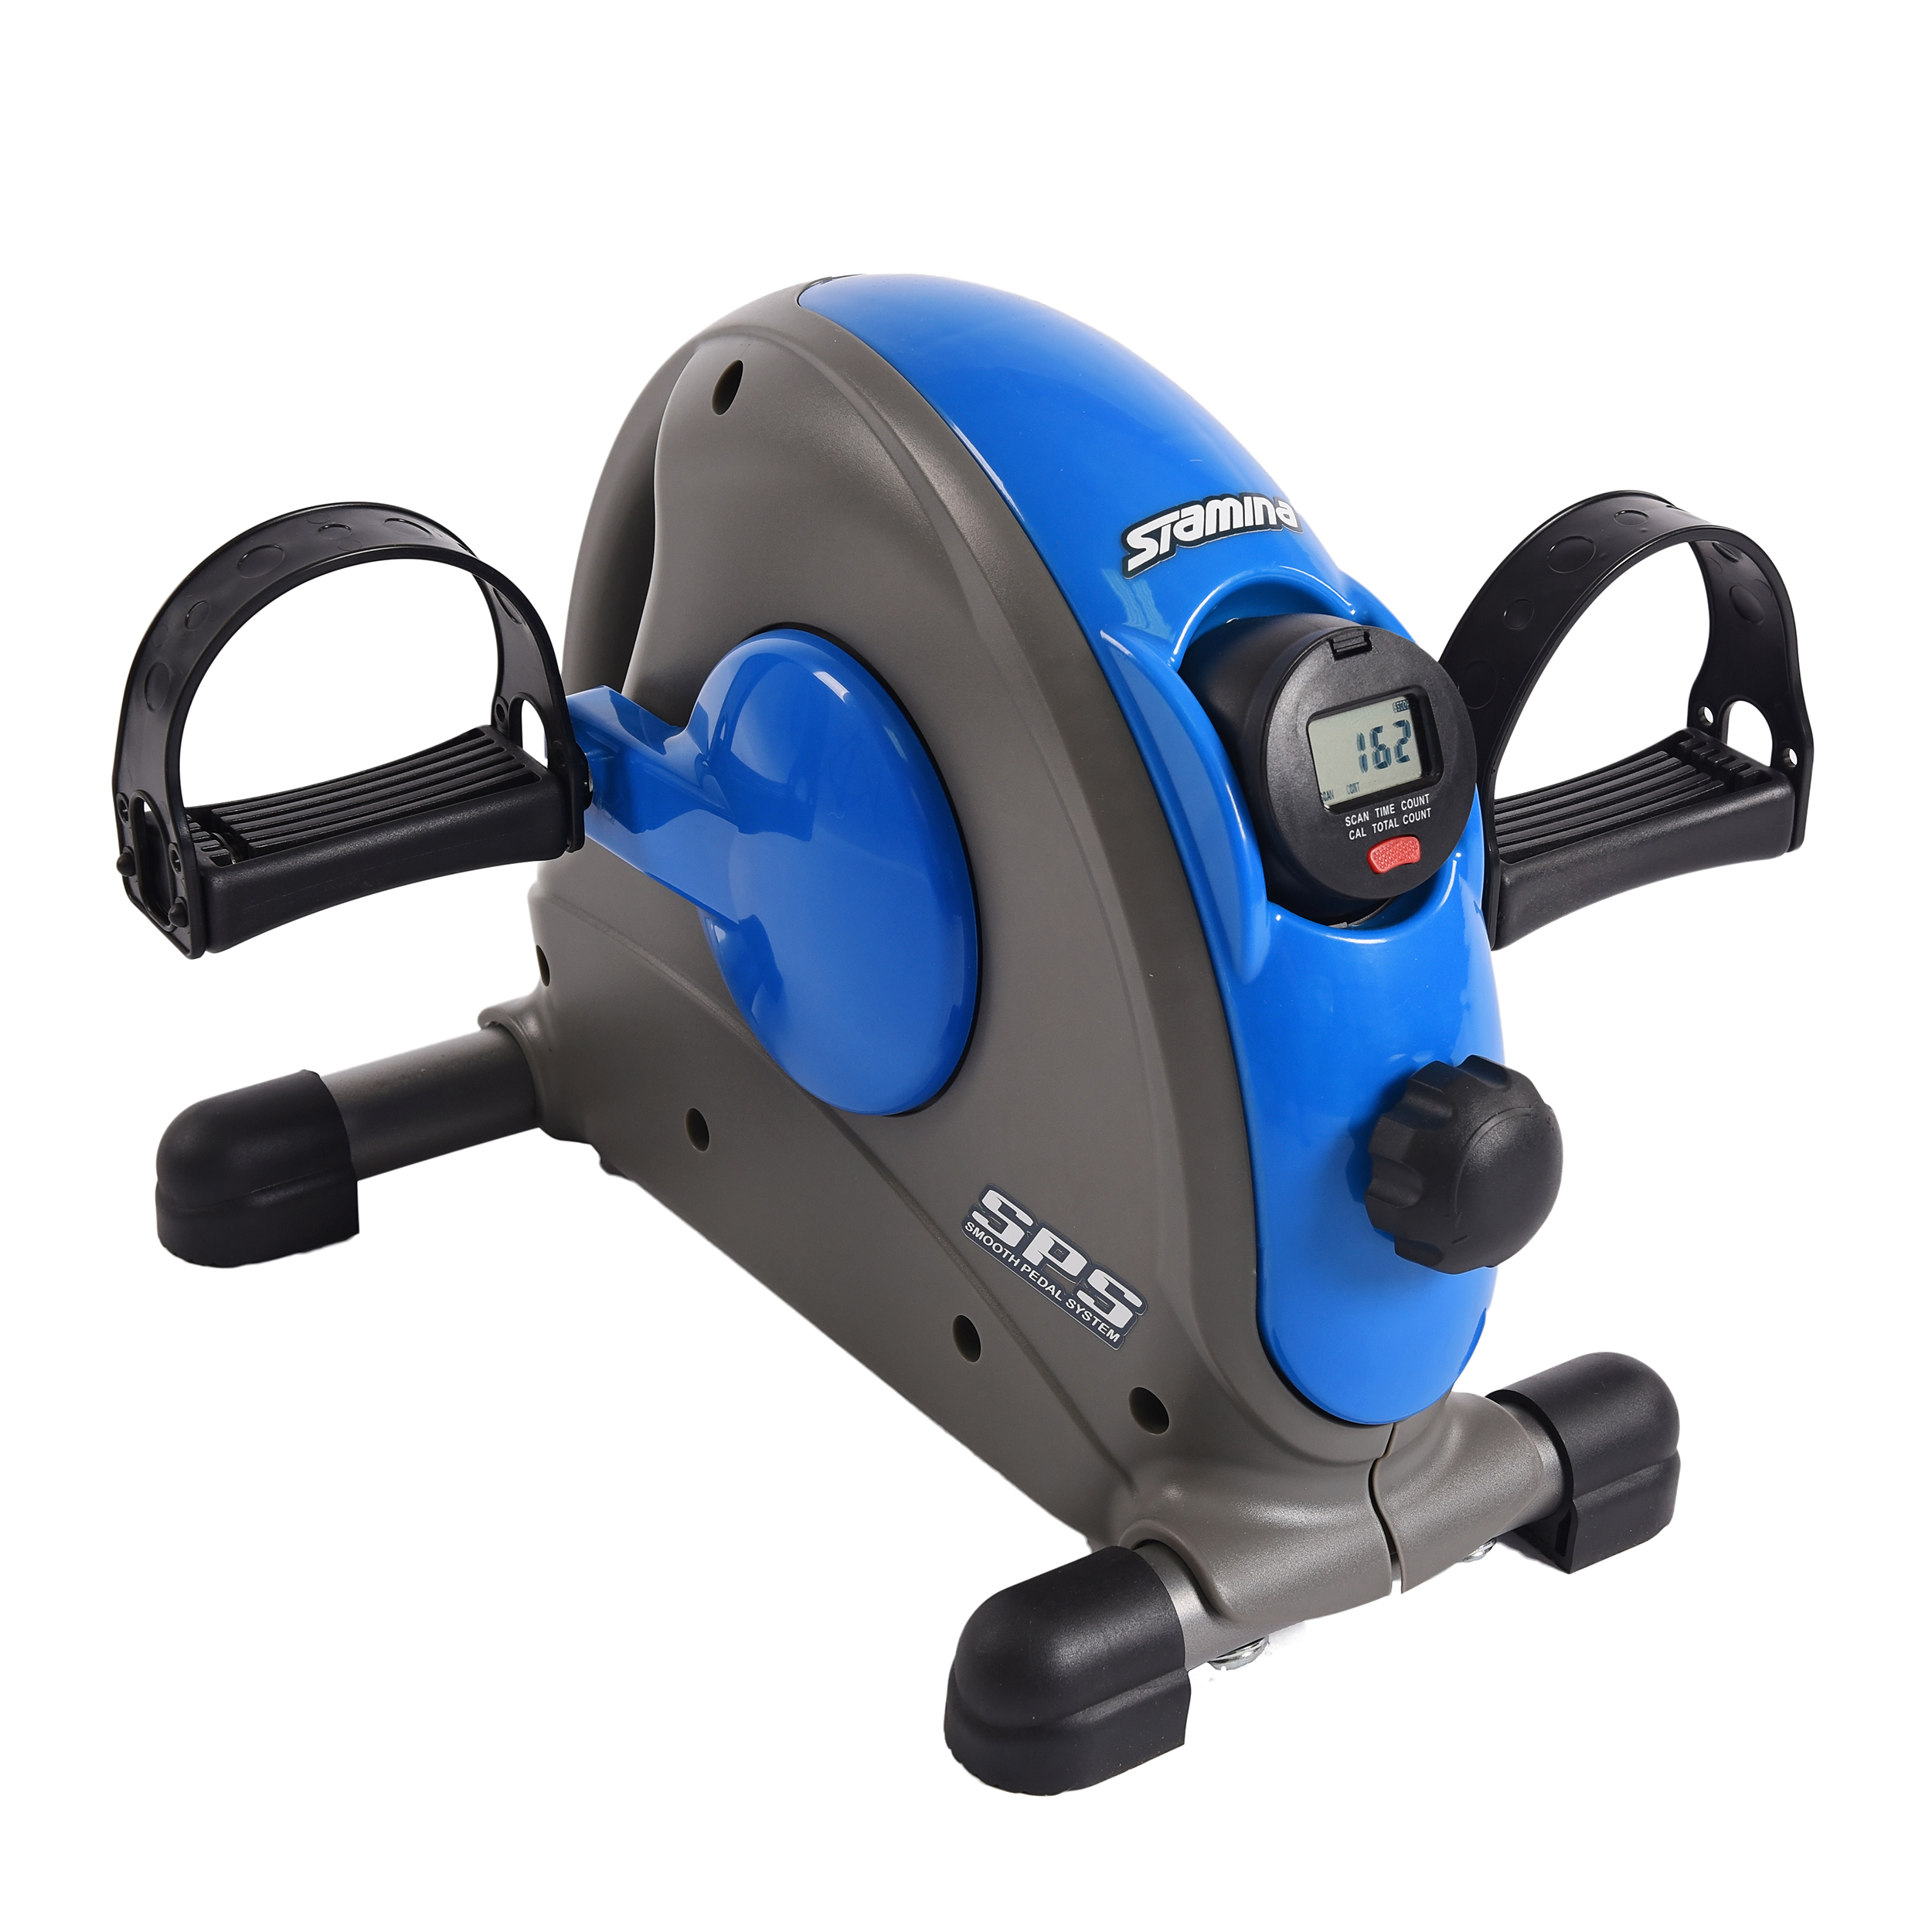 Review of the Stamina Mini Exercise Bike